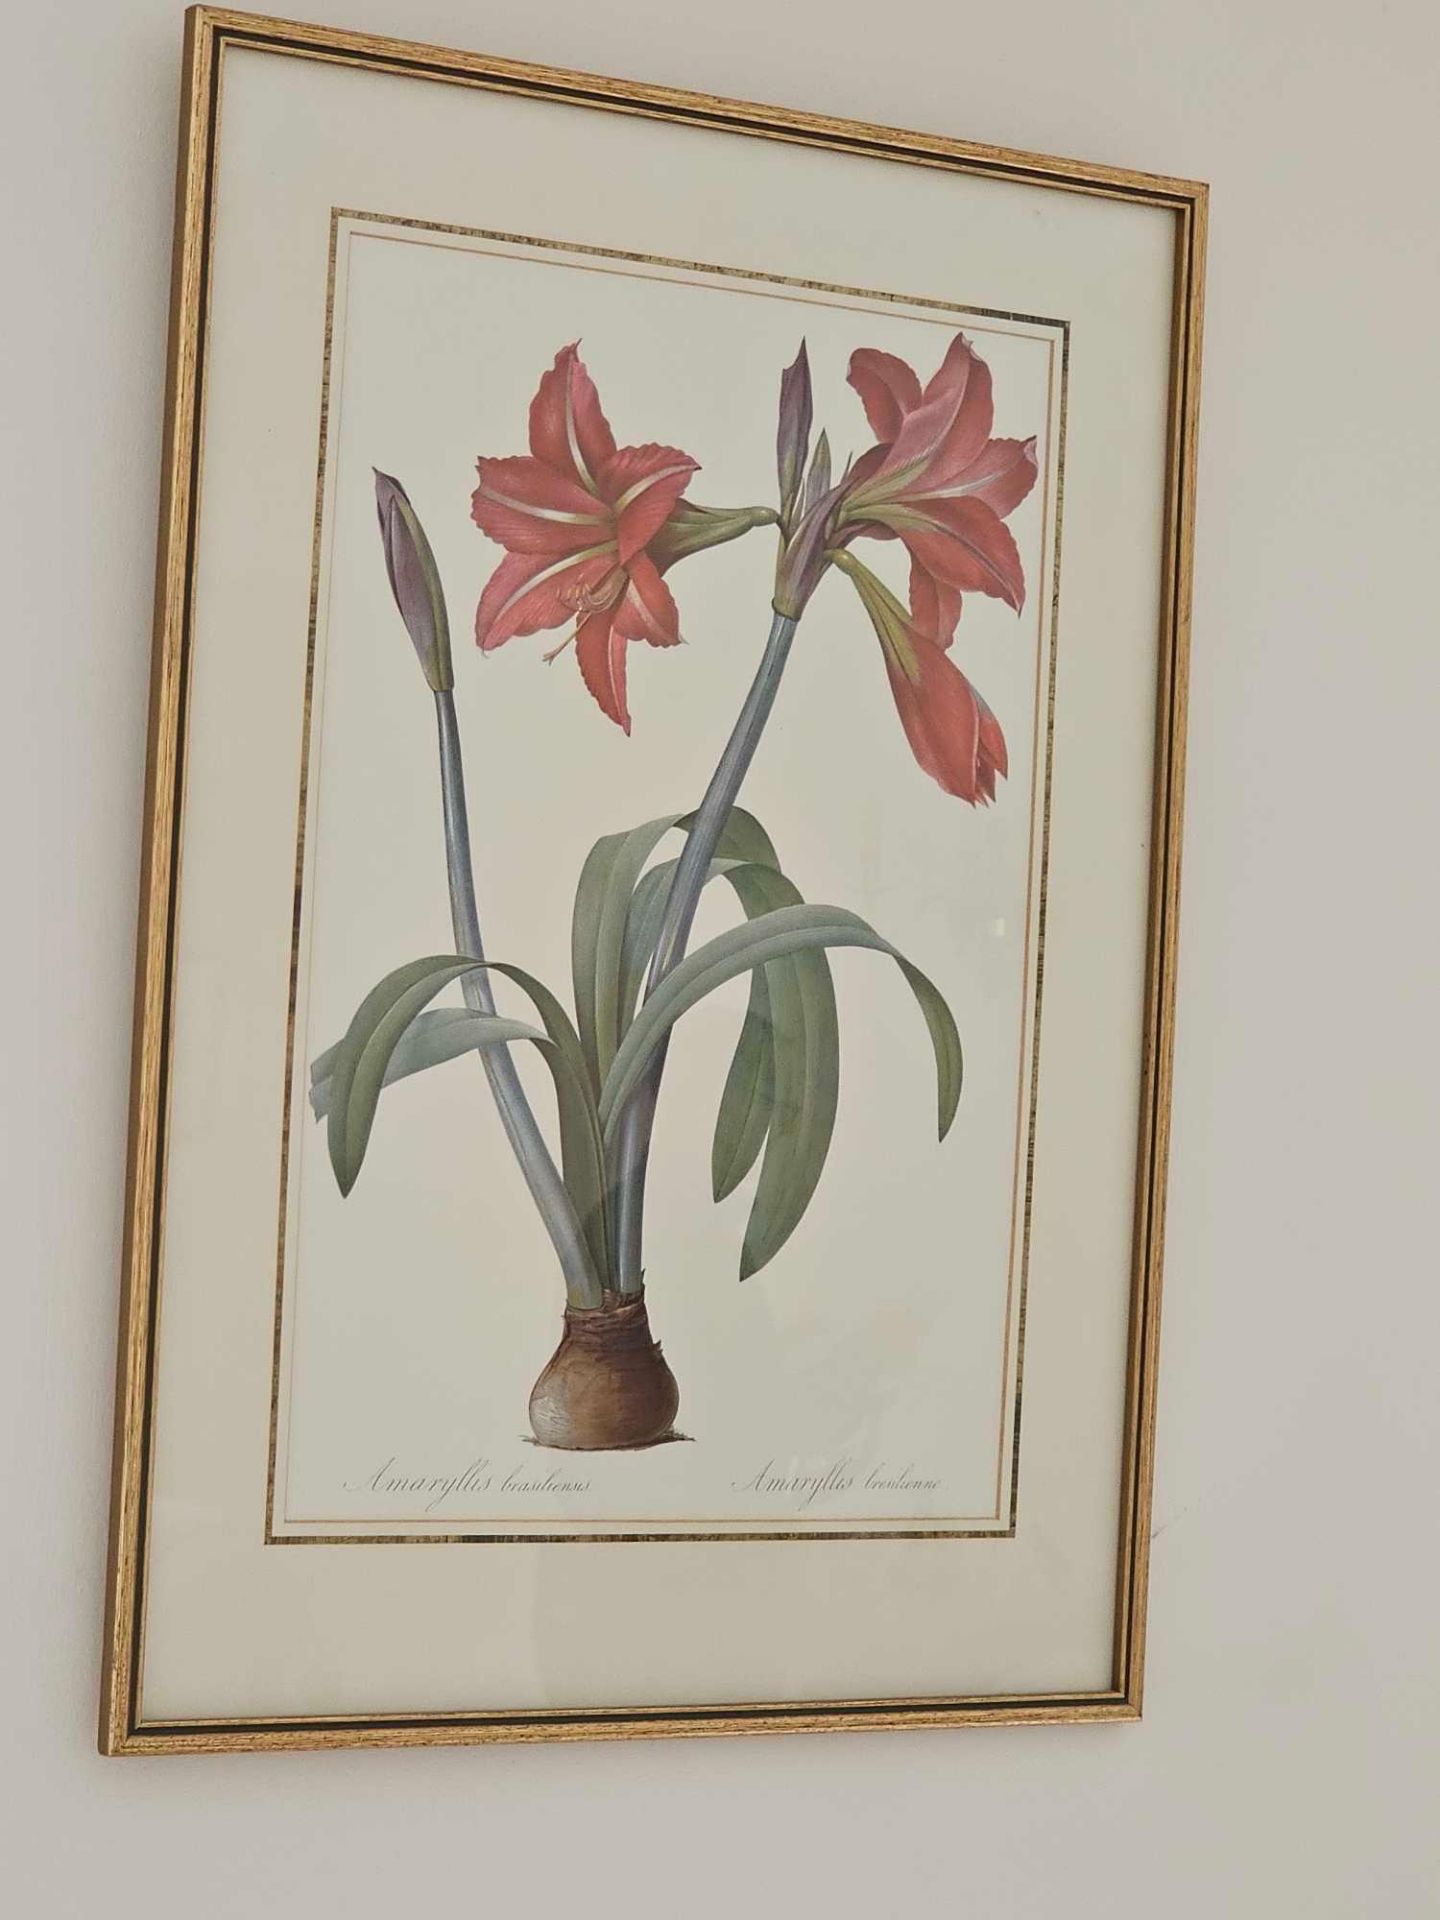 Lithograph Of Amaryllis Brasiliensis By Pierre Joseph Celestin RedoutÃ© From P. J. RedoutÃ©'s